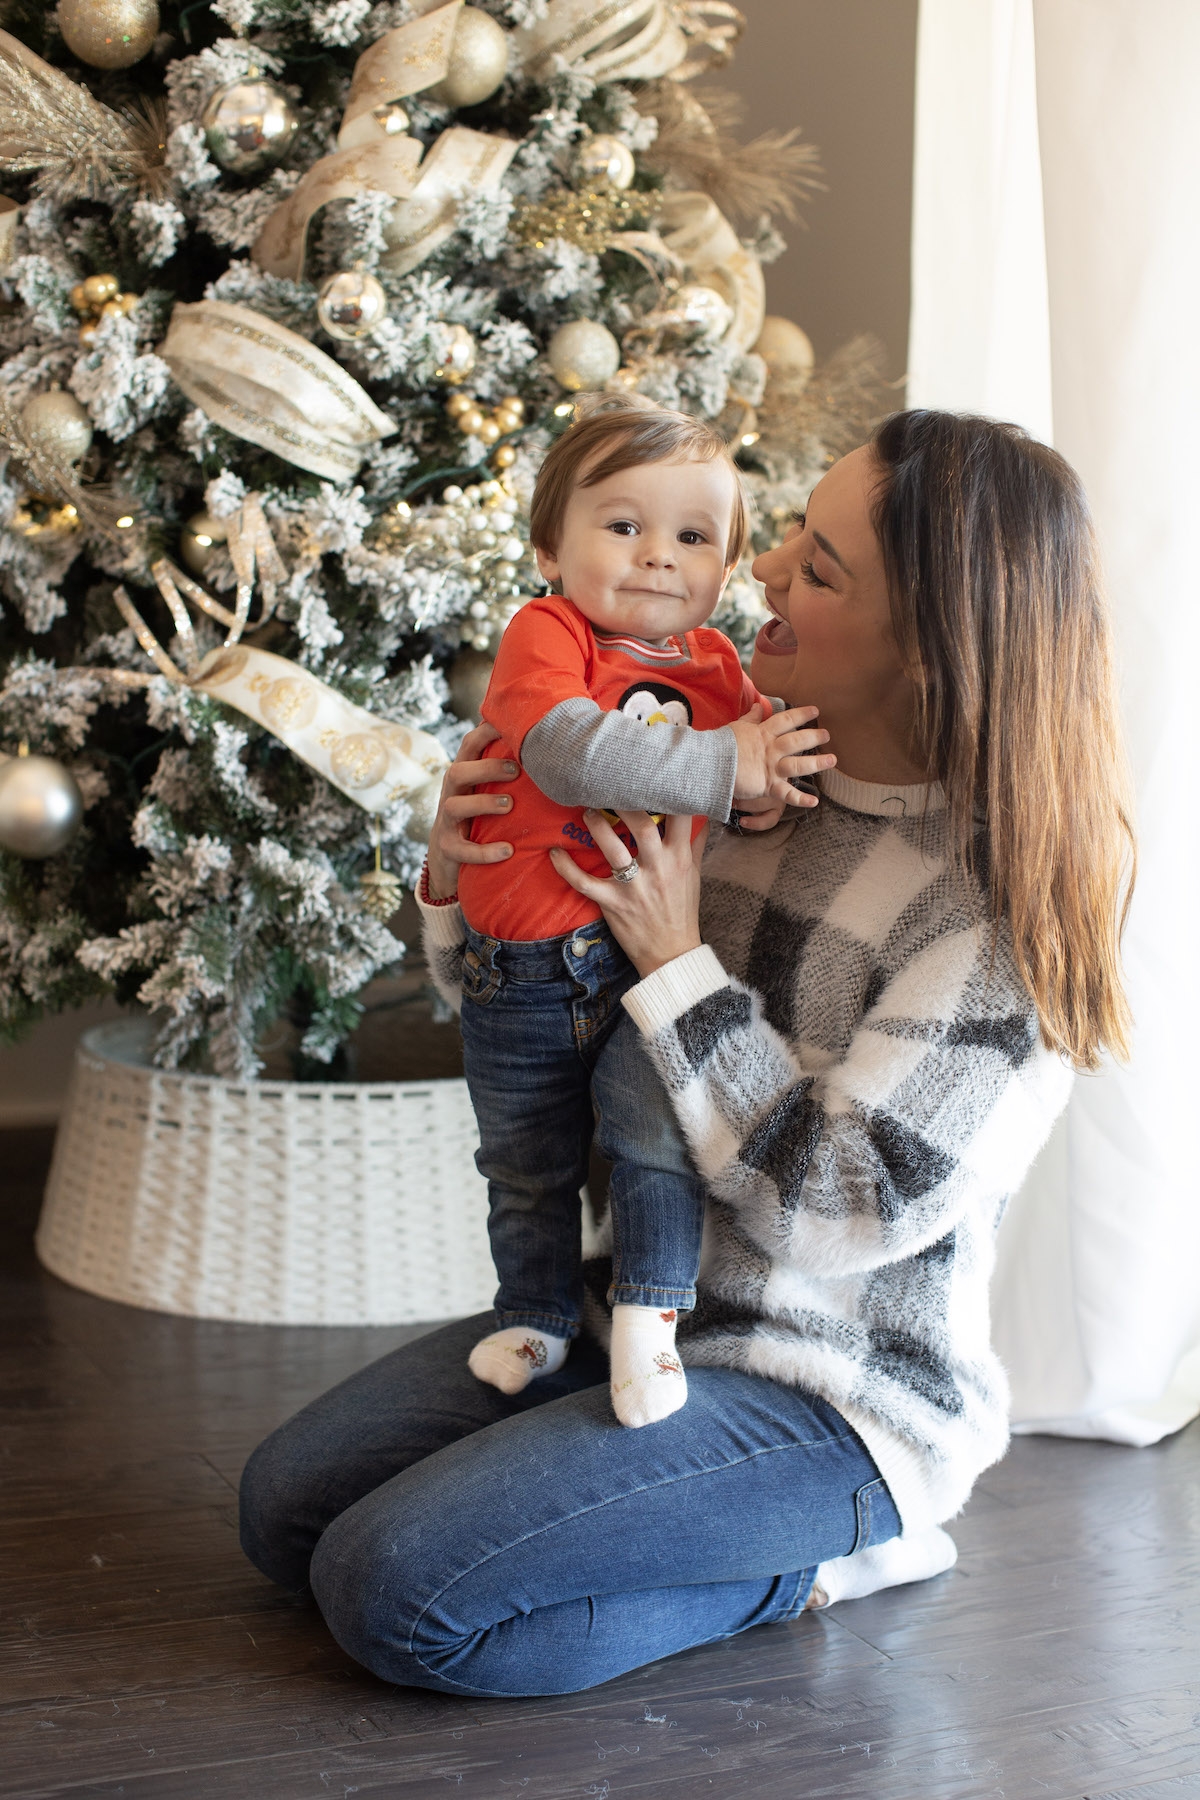 Holiday Gift Guide: Top 10 Walmart Educational Toys For Babies by Life + Style blogger, Heather Brown // My Life Well Loved